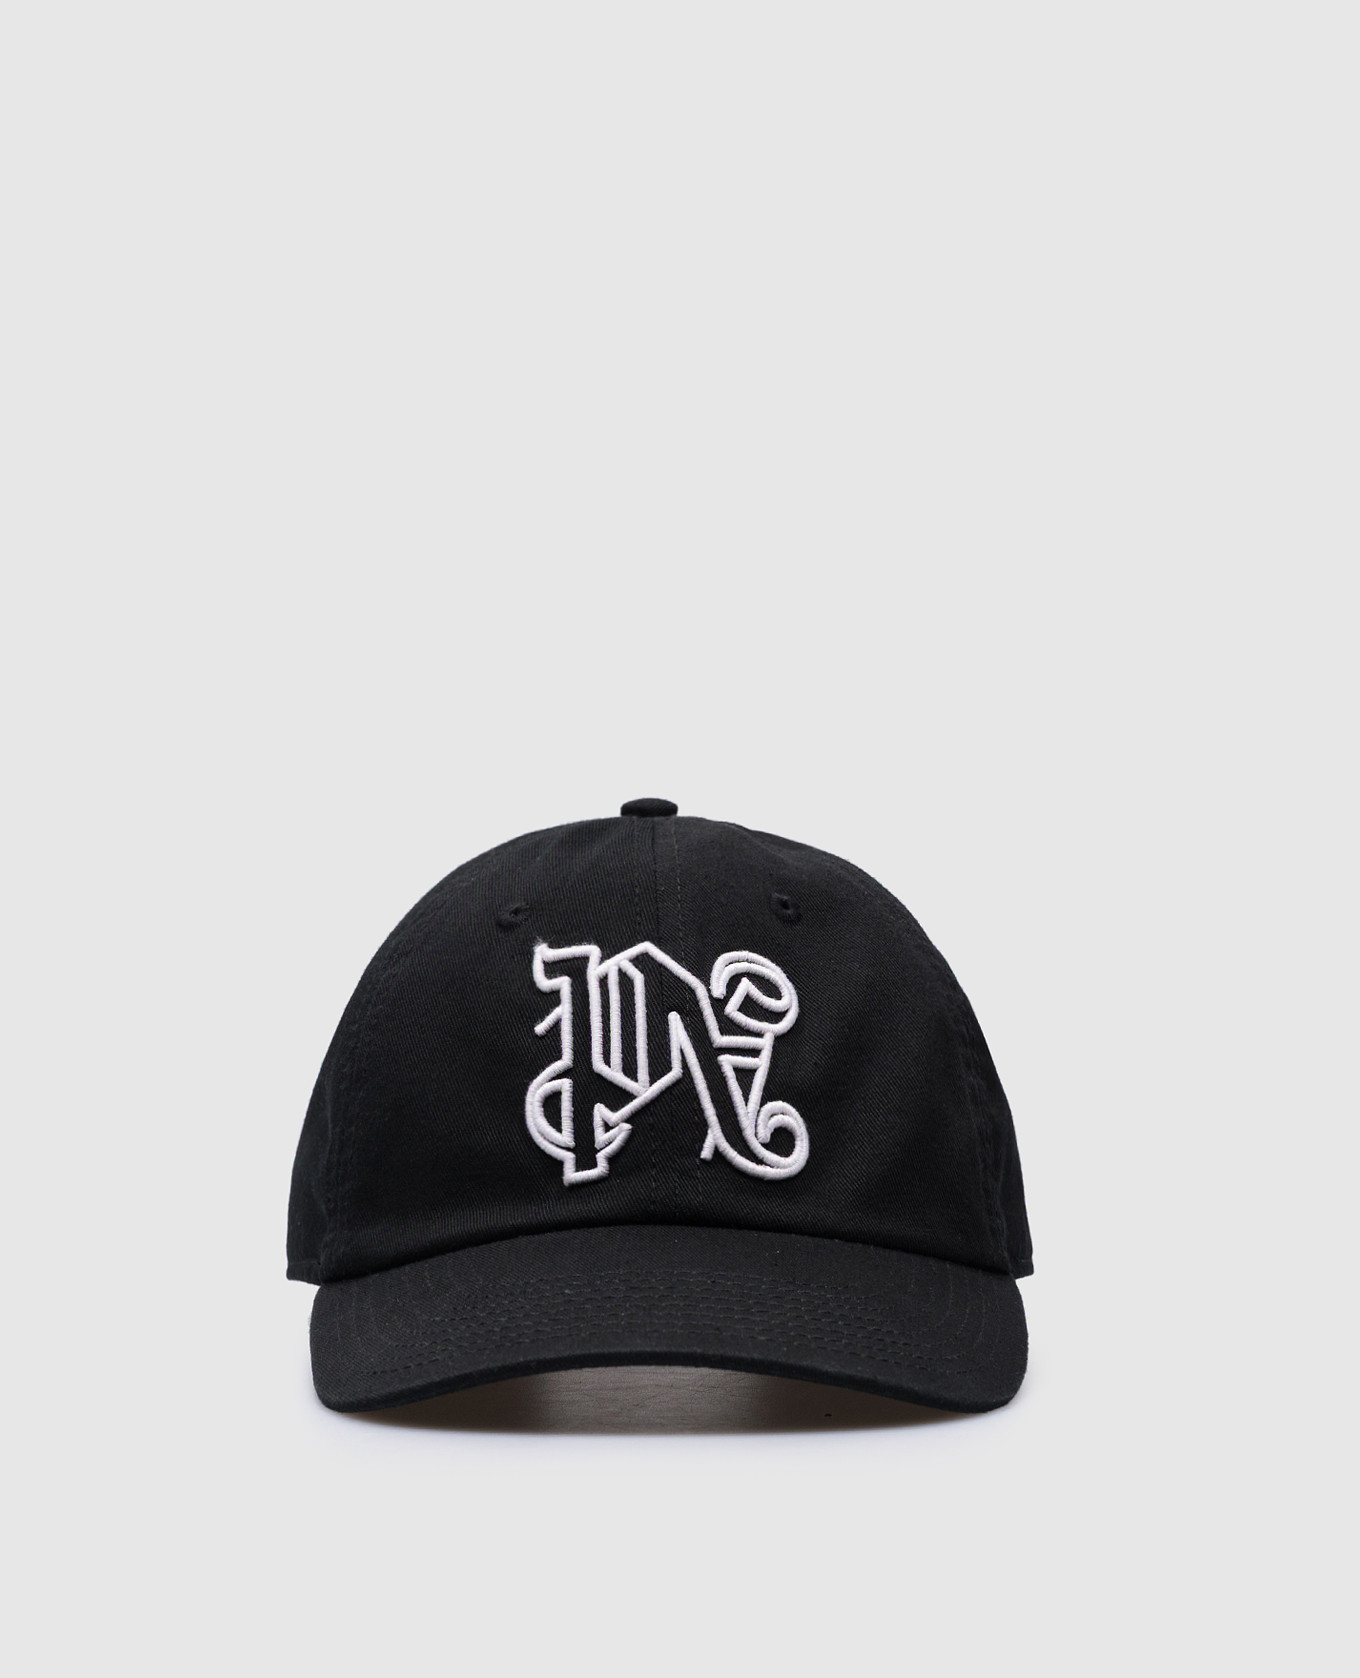 Black cap with contrasting logo embroidery